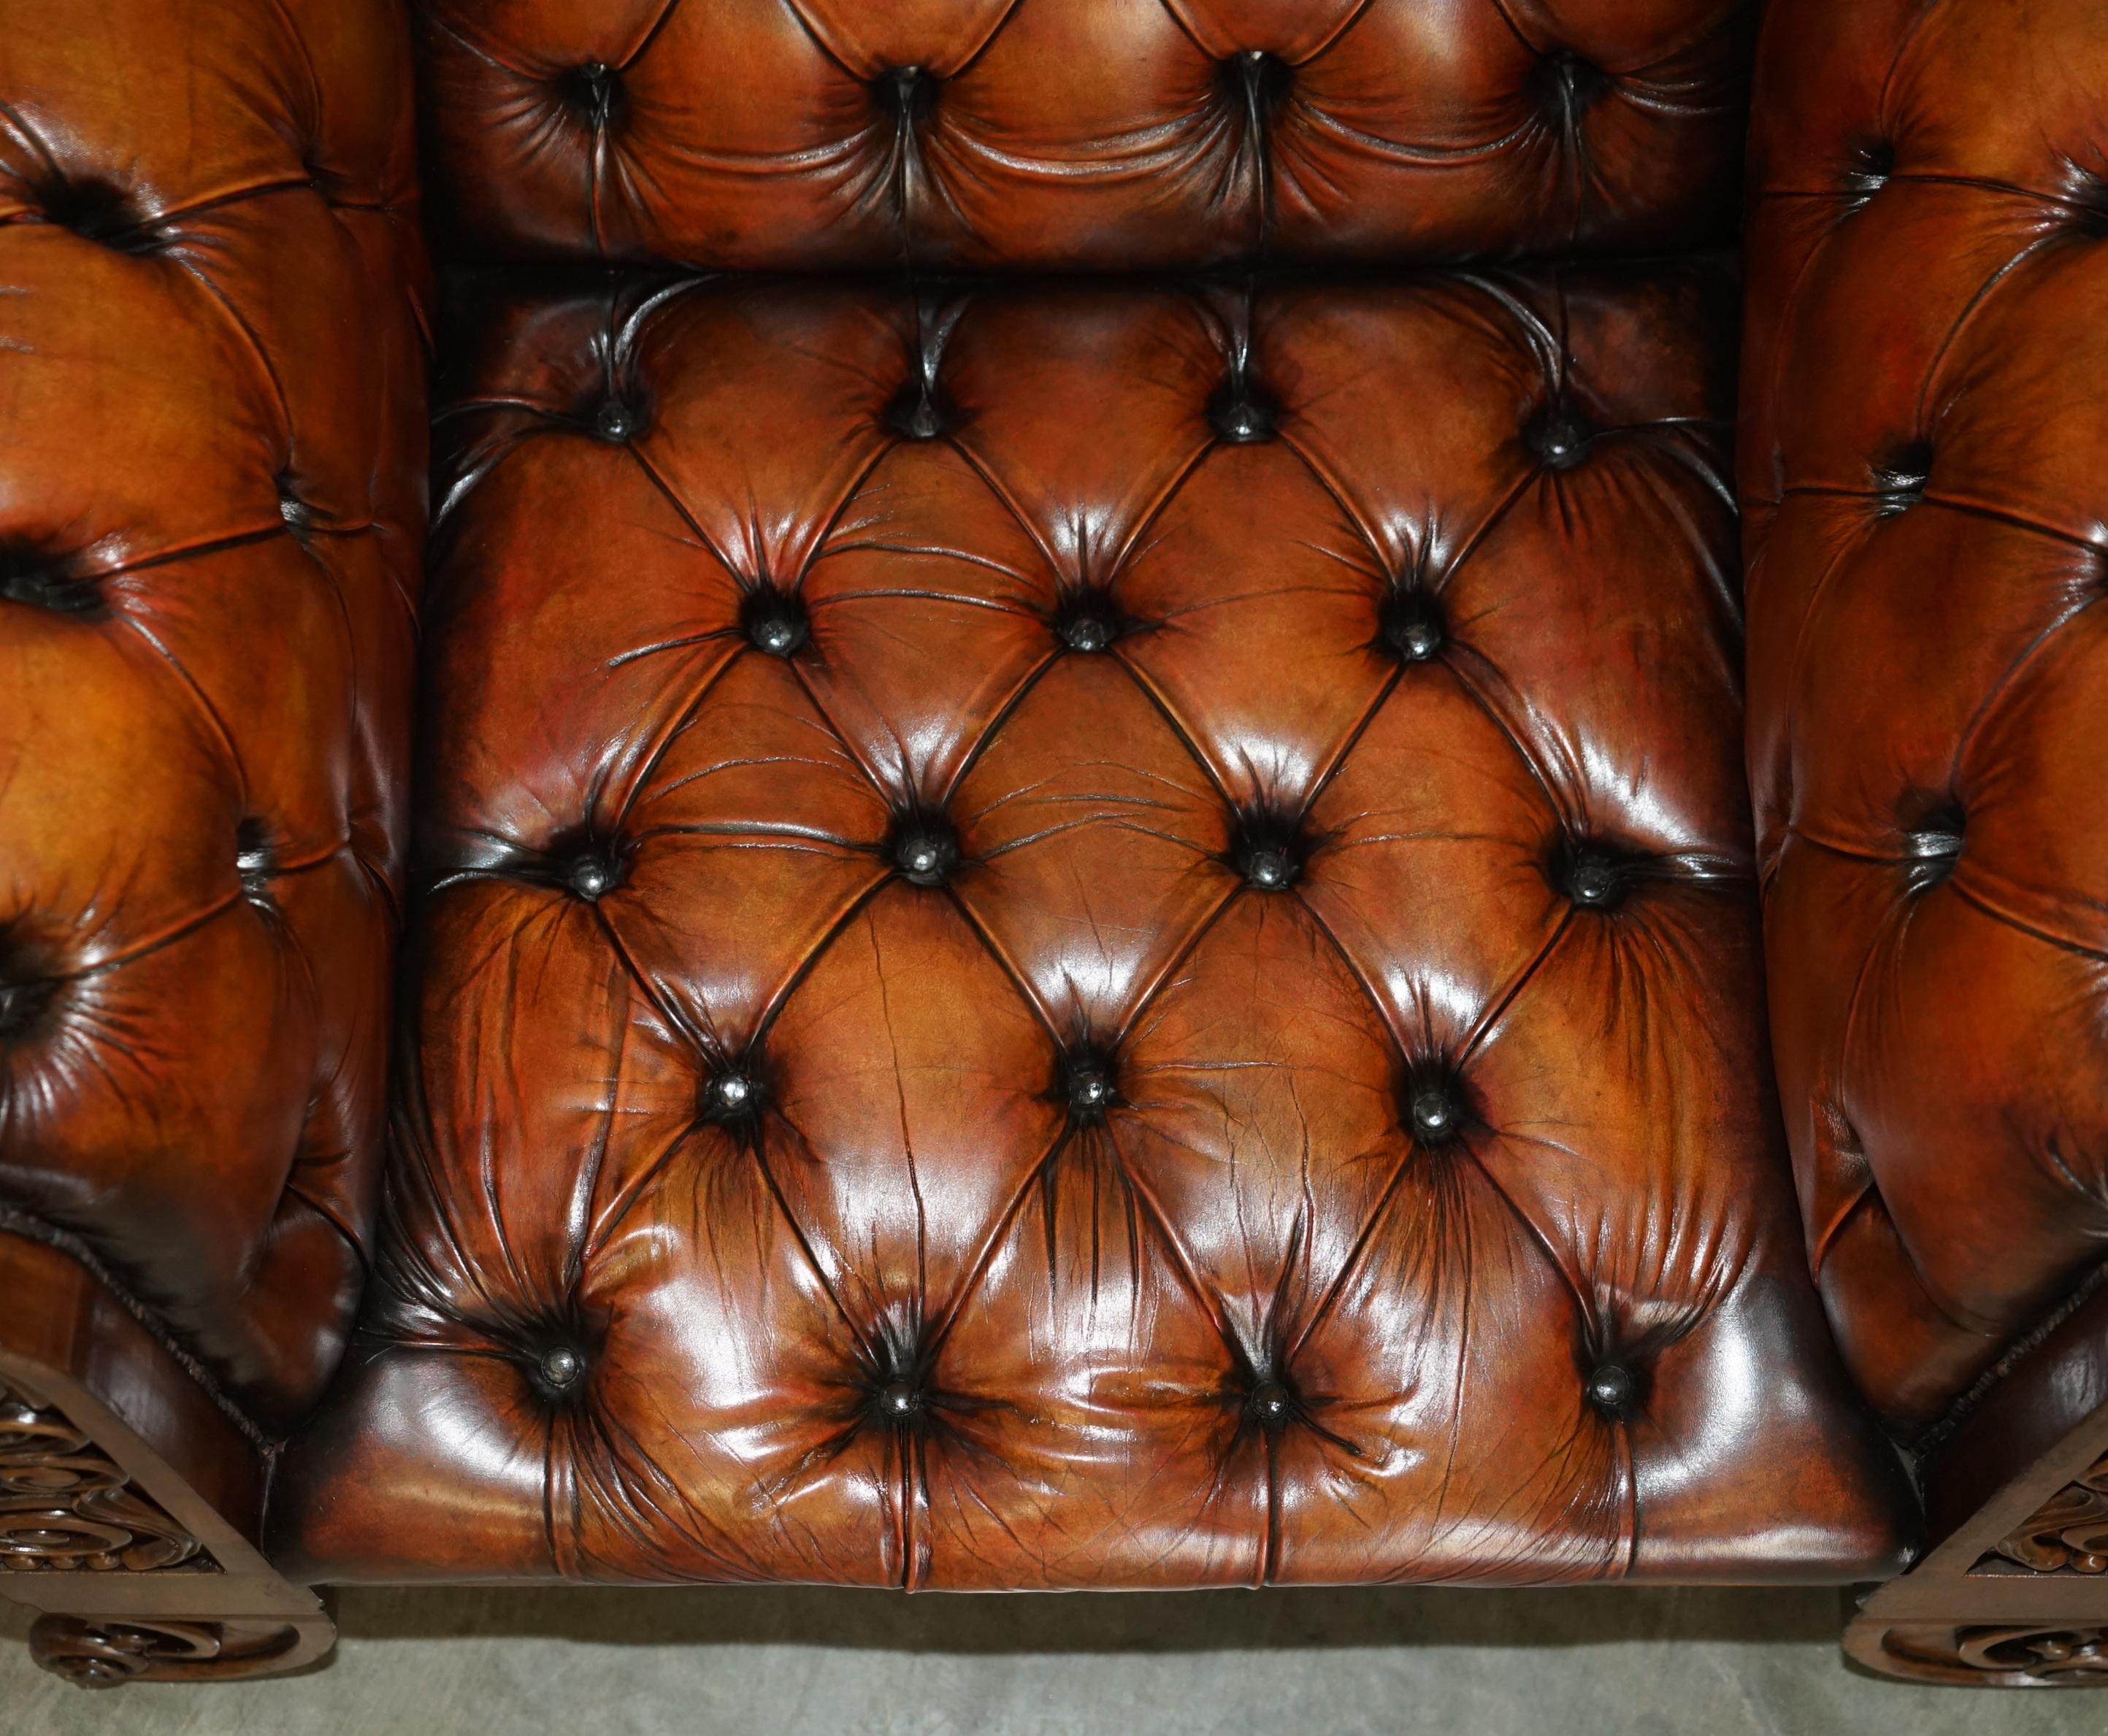 HUGE ORNATELY CARved ANTiQUE FULLY RESTORED CHESTERFIELD KING / QUEENS ARMCHAIR im Angebot 6